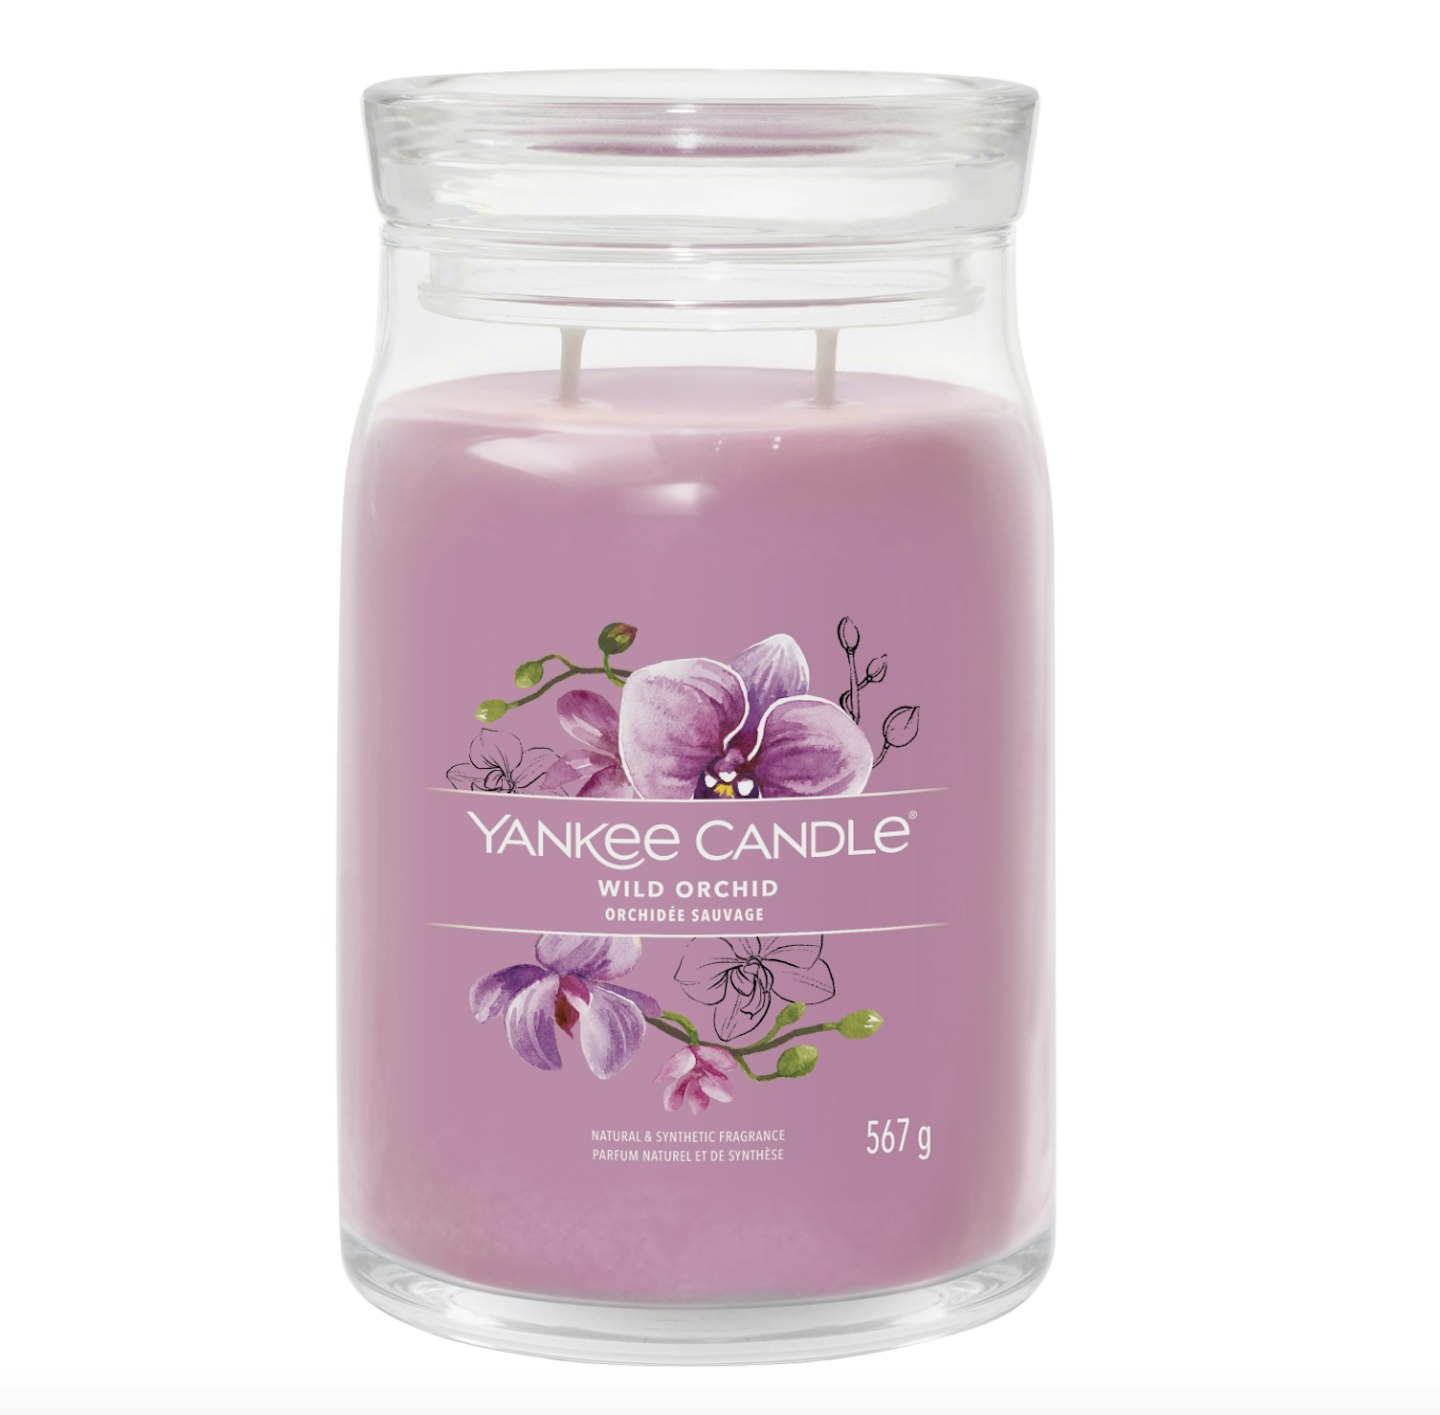 Yankee Candle Wild Orchard 